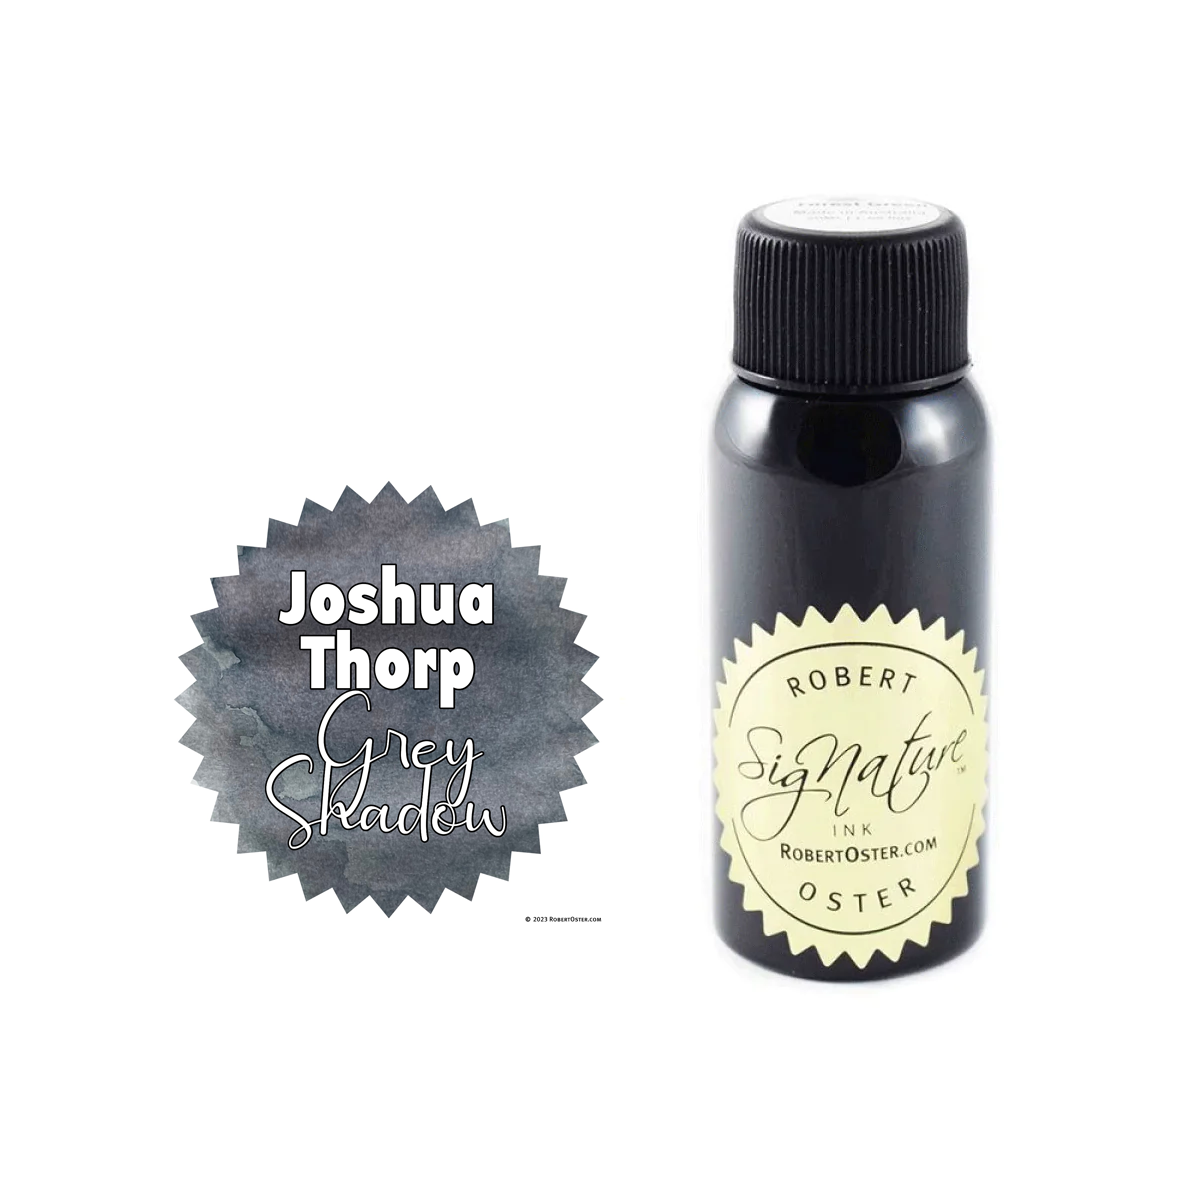 Robert Oster Signature Ink Bottle Joshua Thorp Grey Shadow - Pencraft the boutique